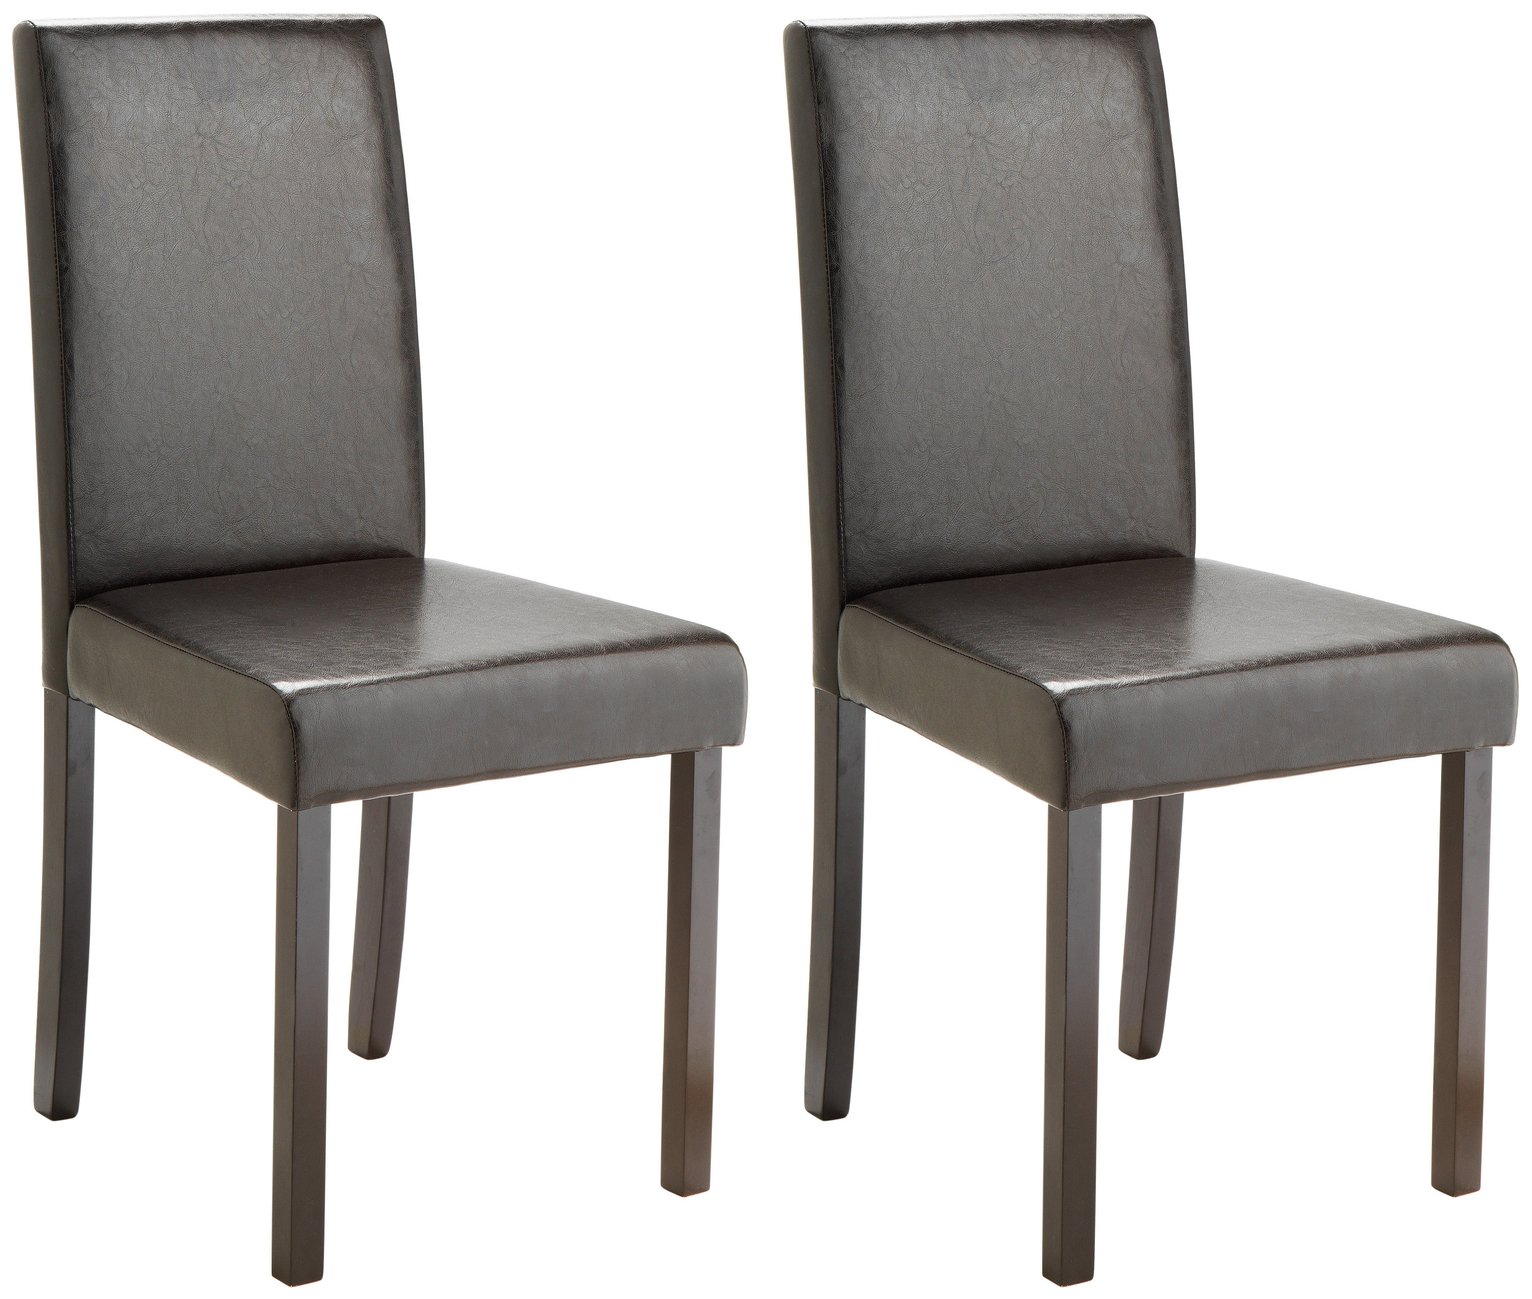 Argos Home Pair of Leather Effect Mid Back Chairs - Black (4590657